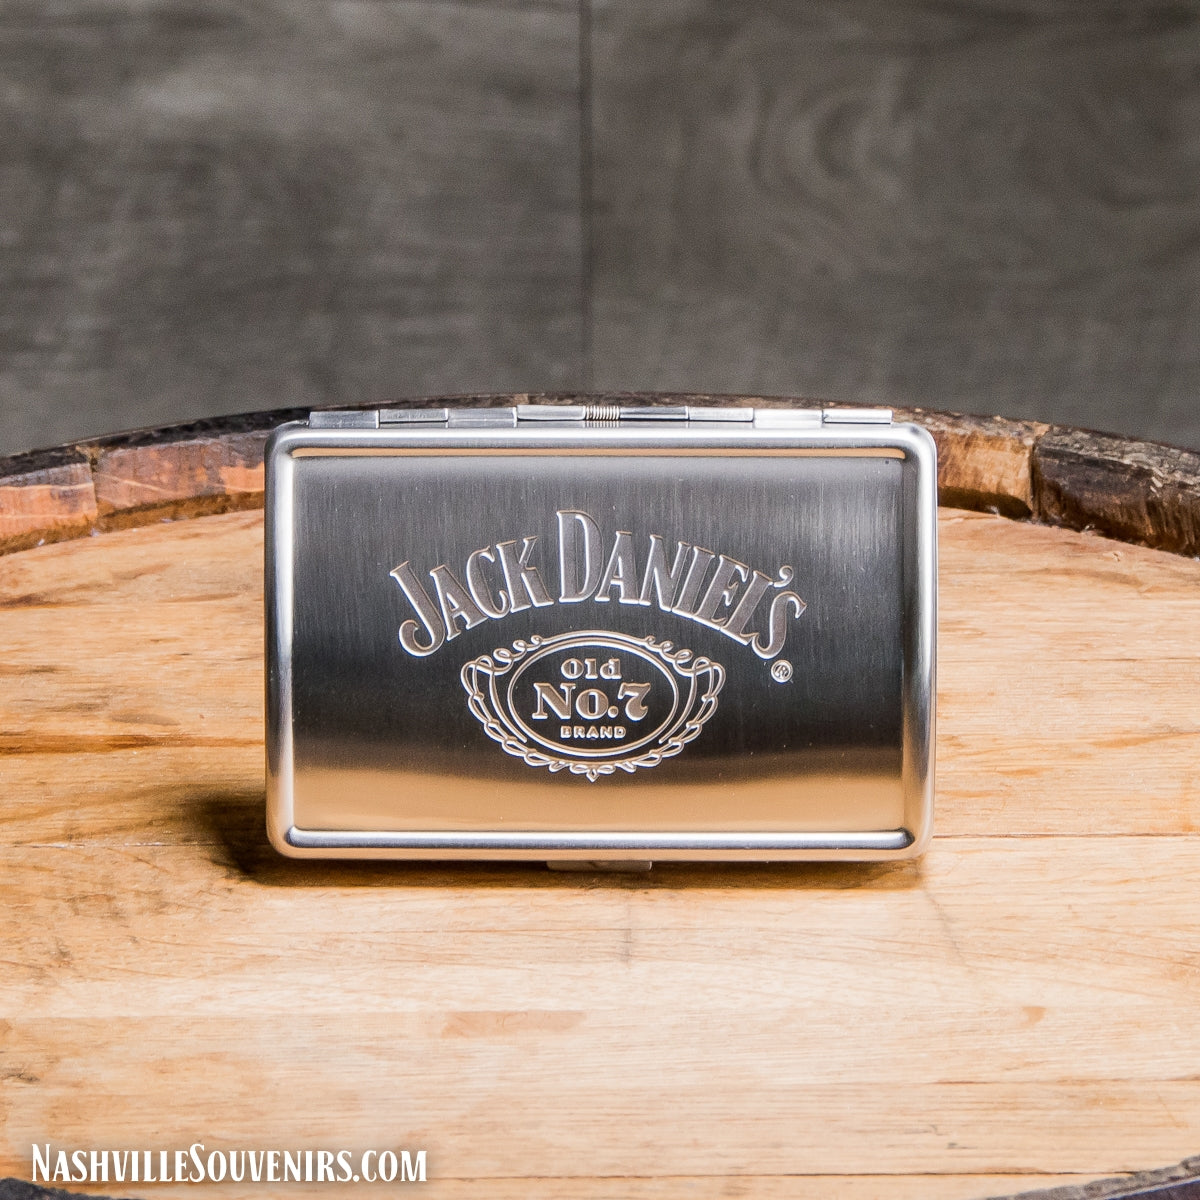 Officially licensed Jack Daniels 0.7mm Gauge Stainless Carry Case.  FREE SHIPPING on all US orders over $75!